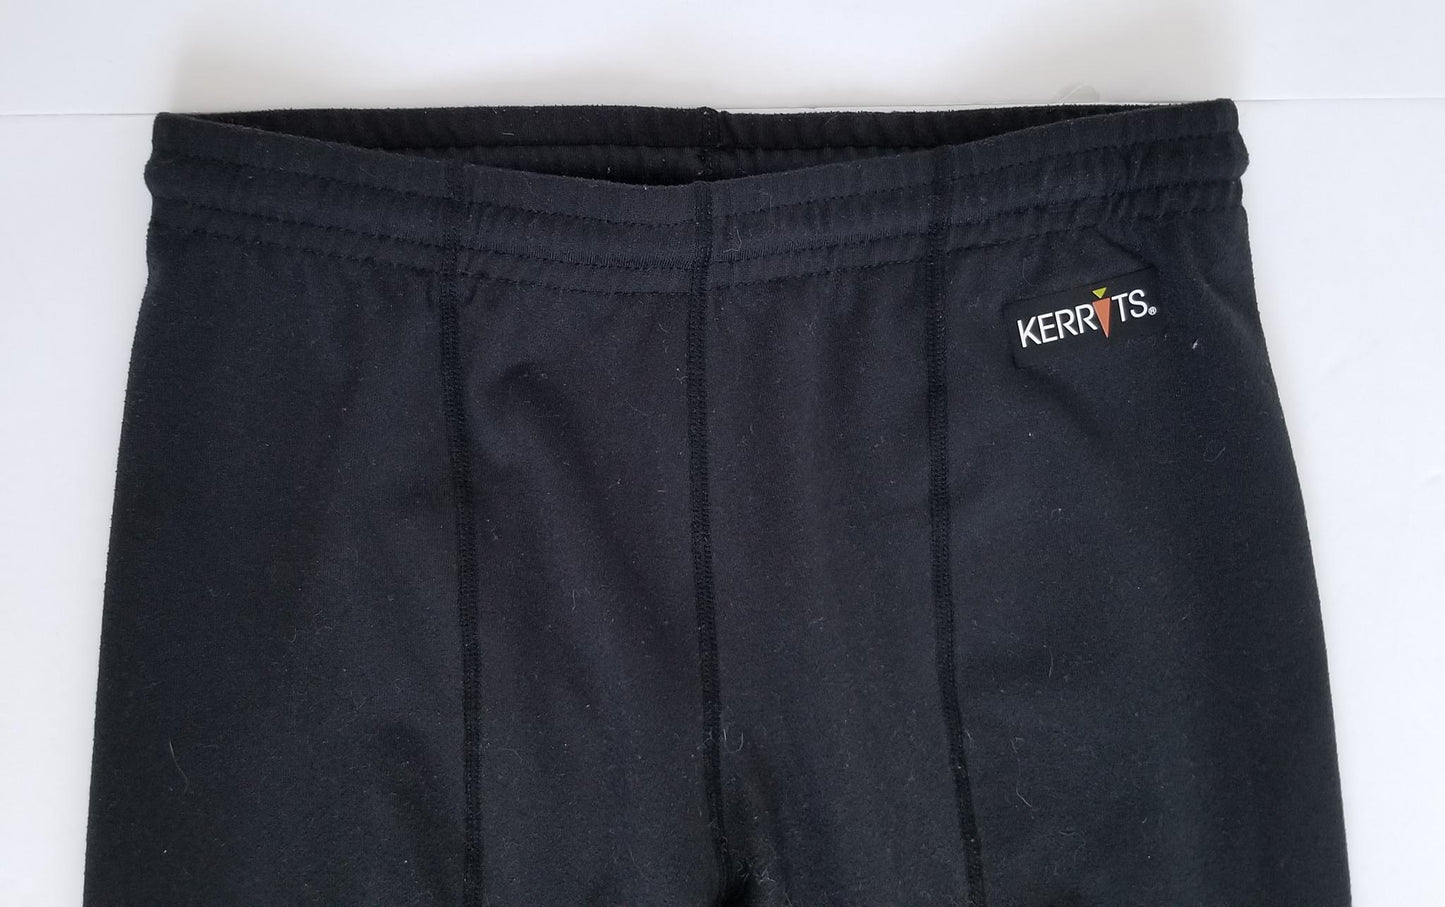 Kerrits Performance Knee Patch Tight - Black - Youth Large